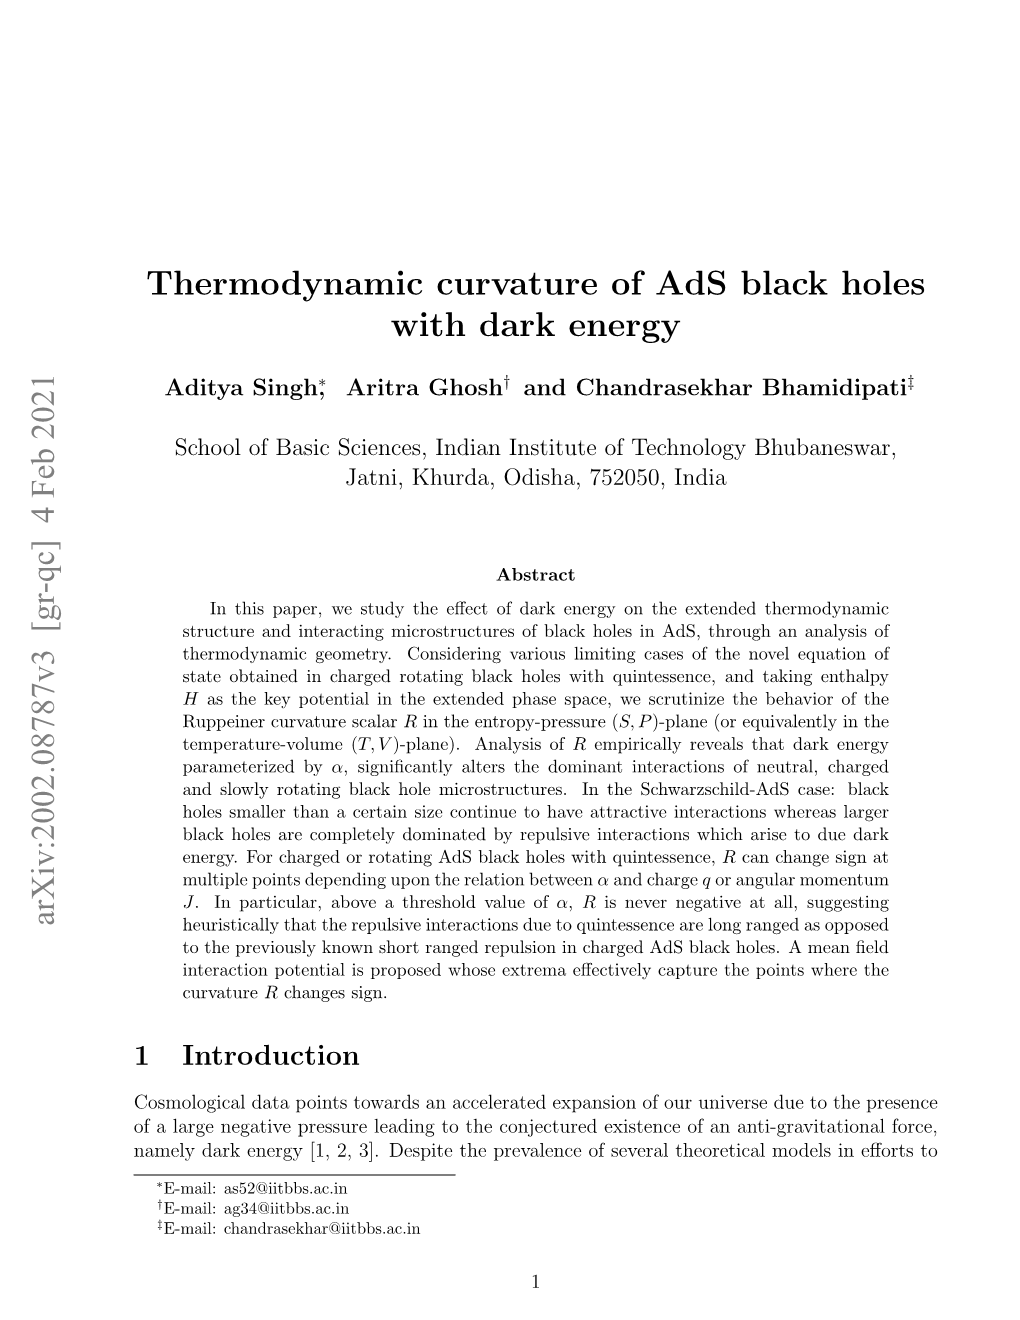 Thermodynamic Curvature of Ads Black Holes with Dark Energy Arxiv